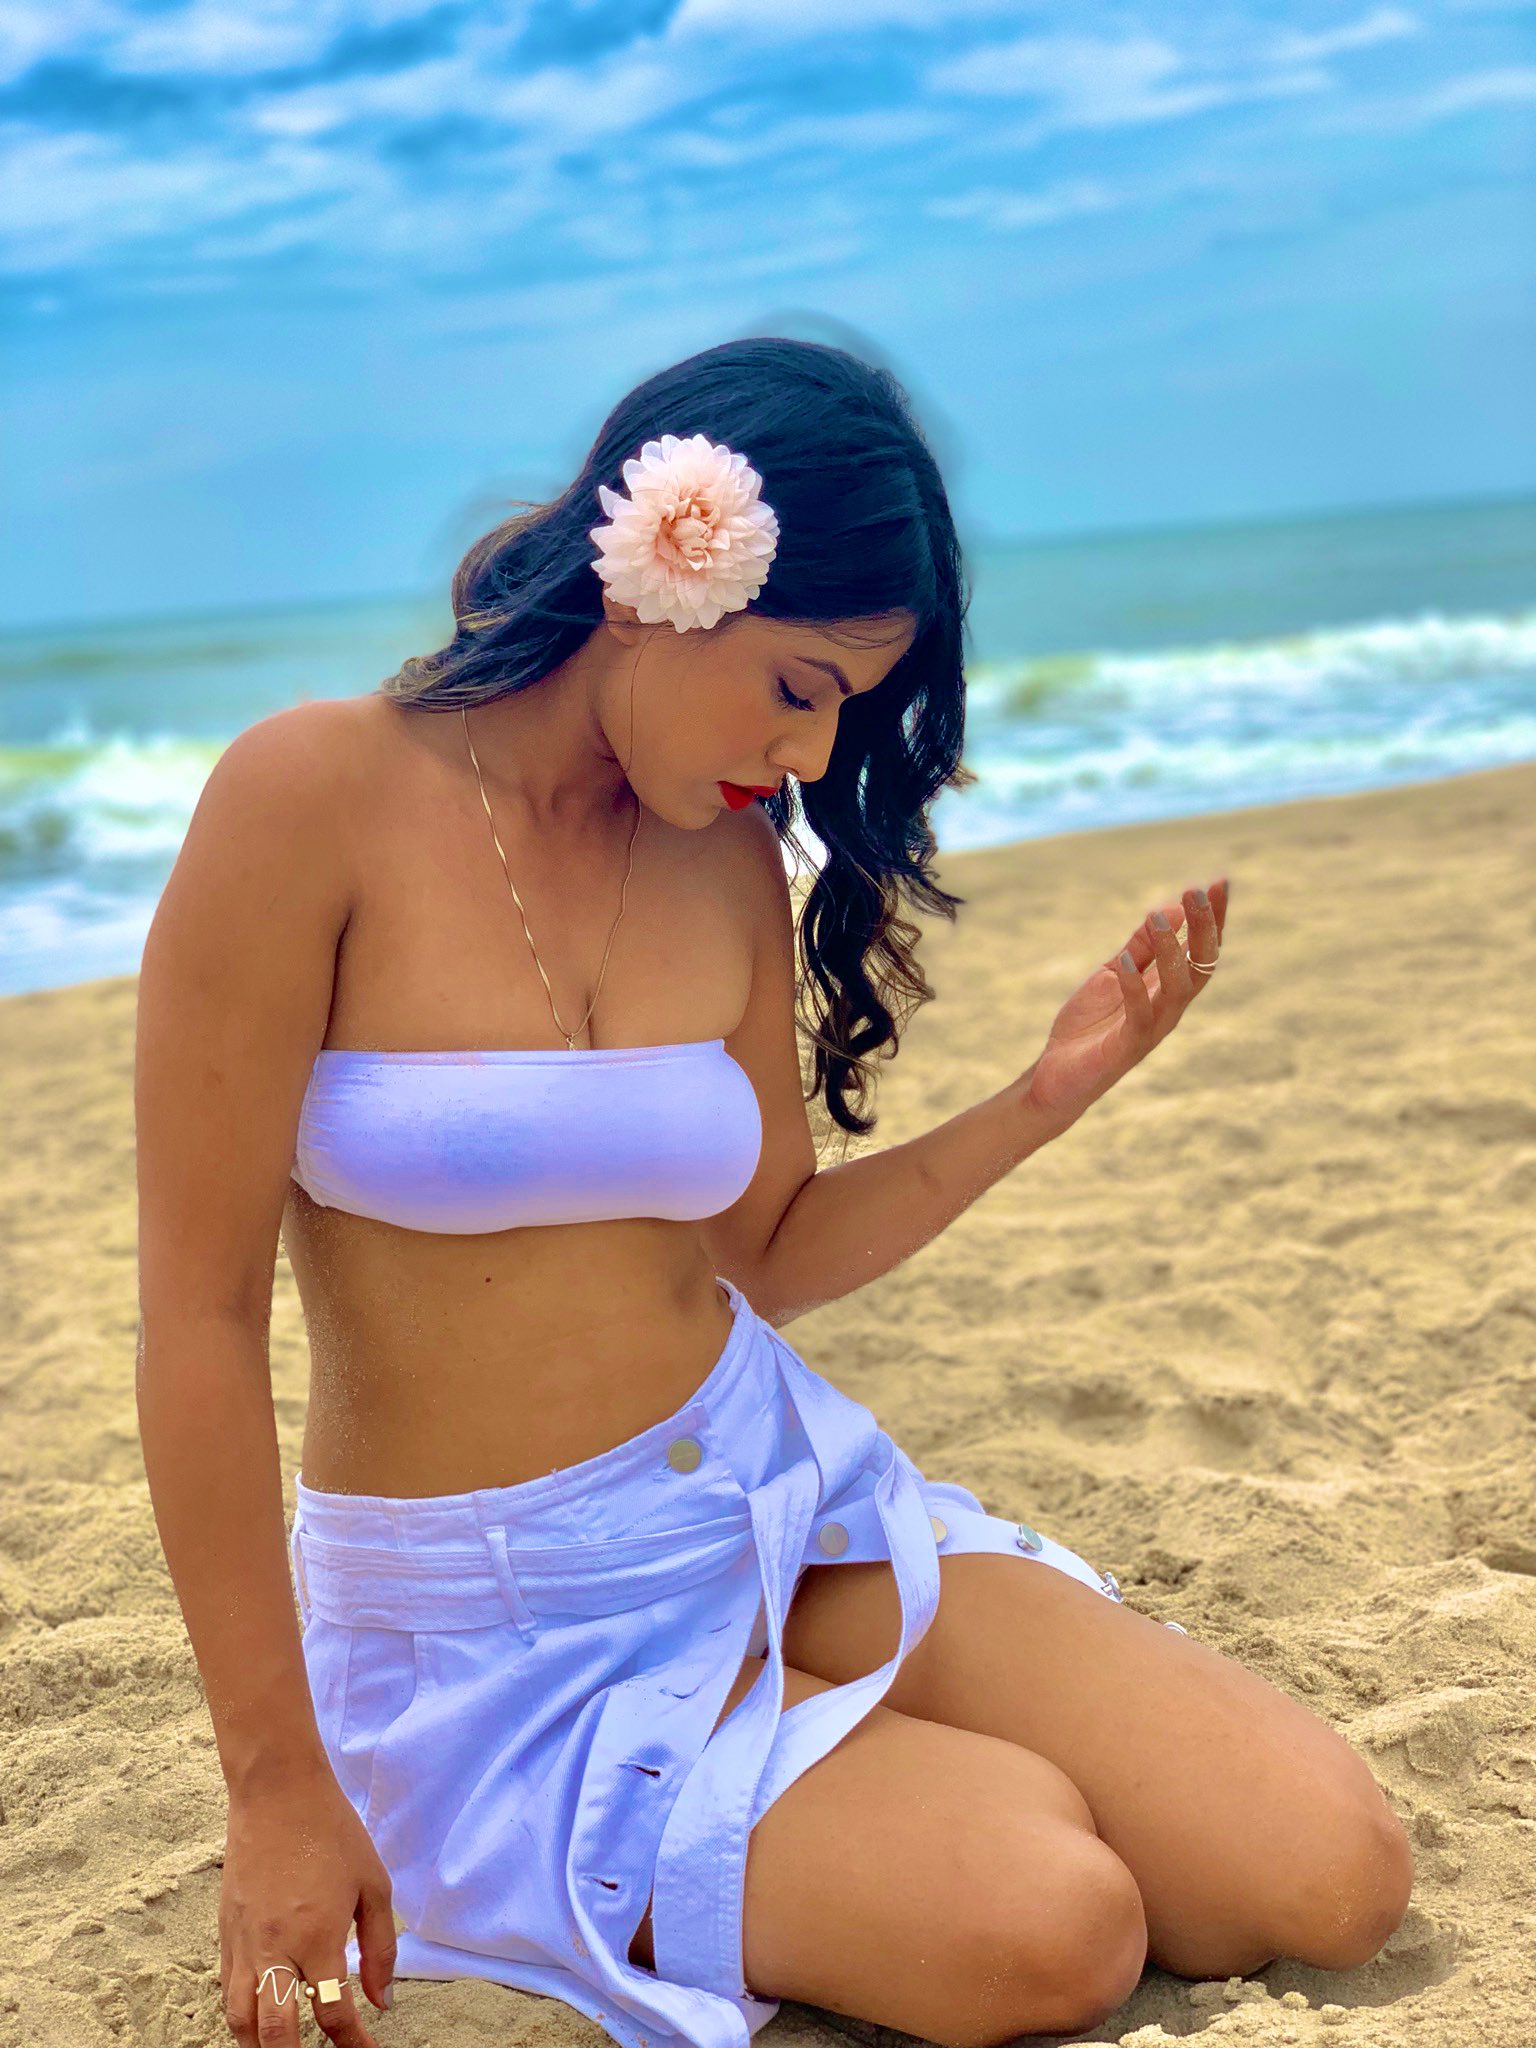 Nia Sharma Shakes Up The INTERNET With Her Alluring Pictures - SEE